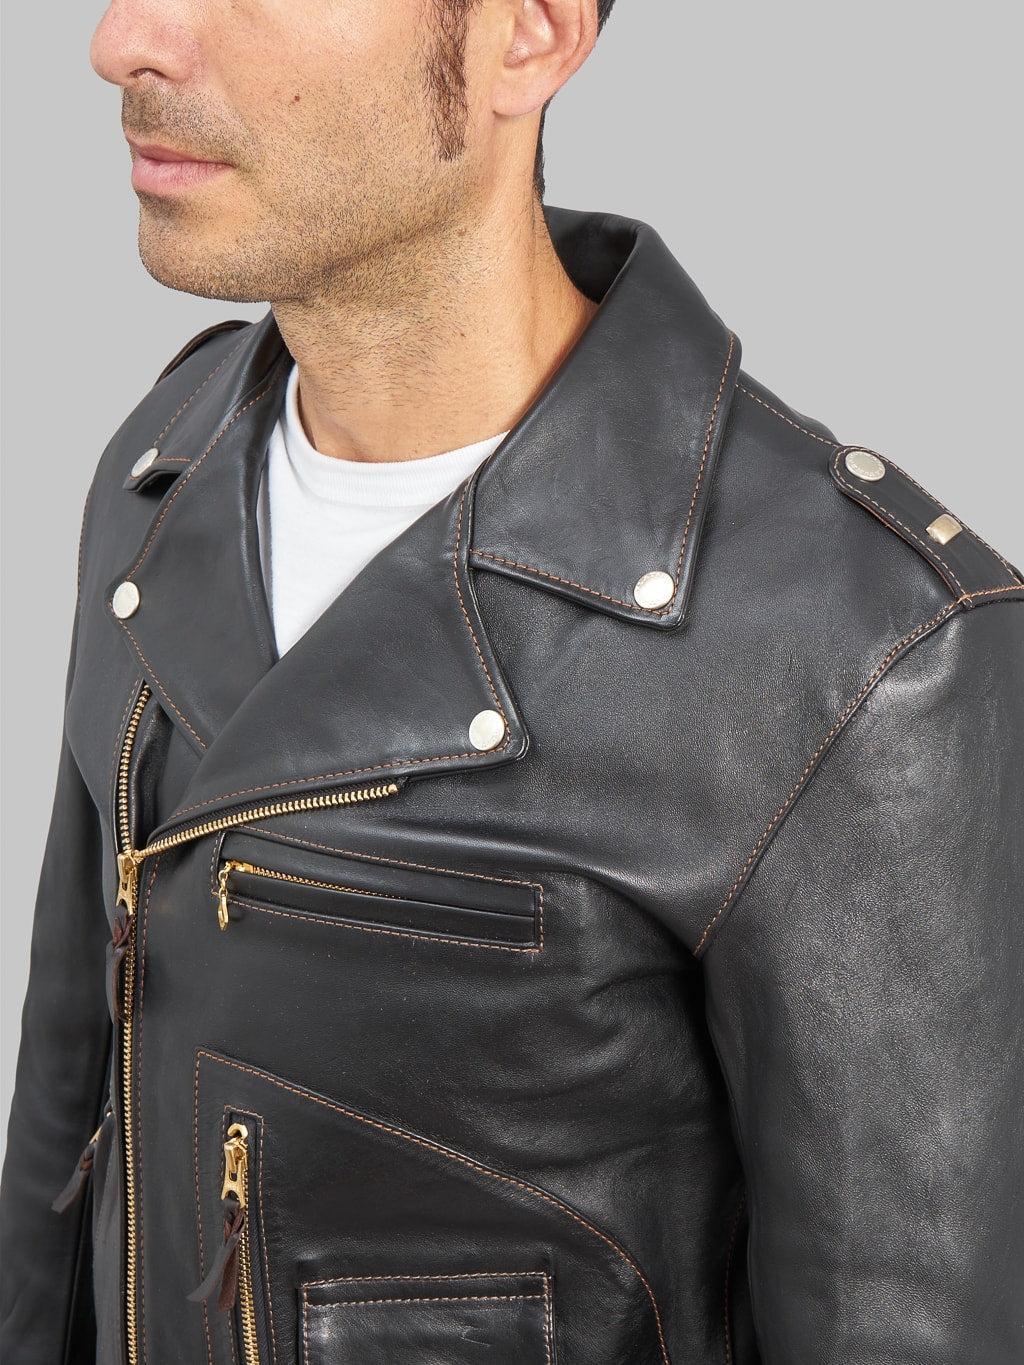 The Flat Head Horsehide Double Riders Jacket Black extra oil